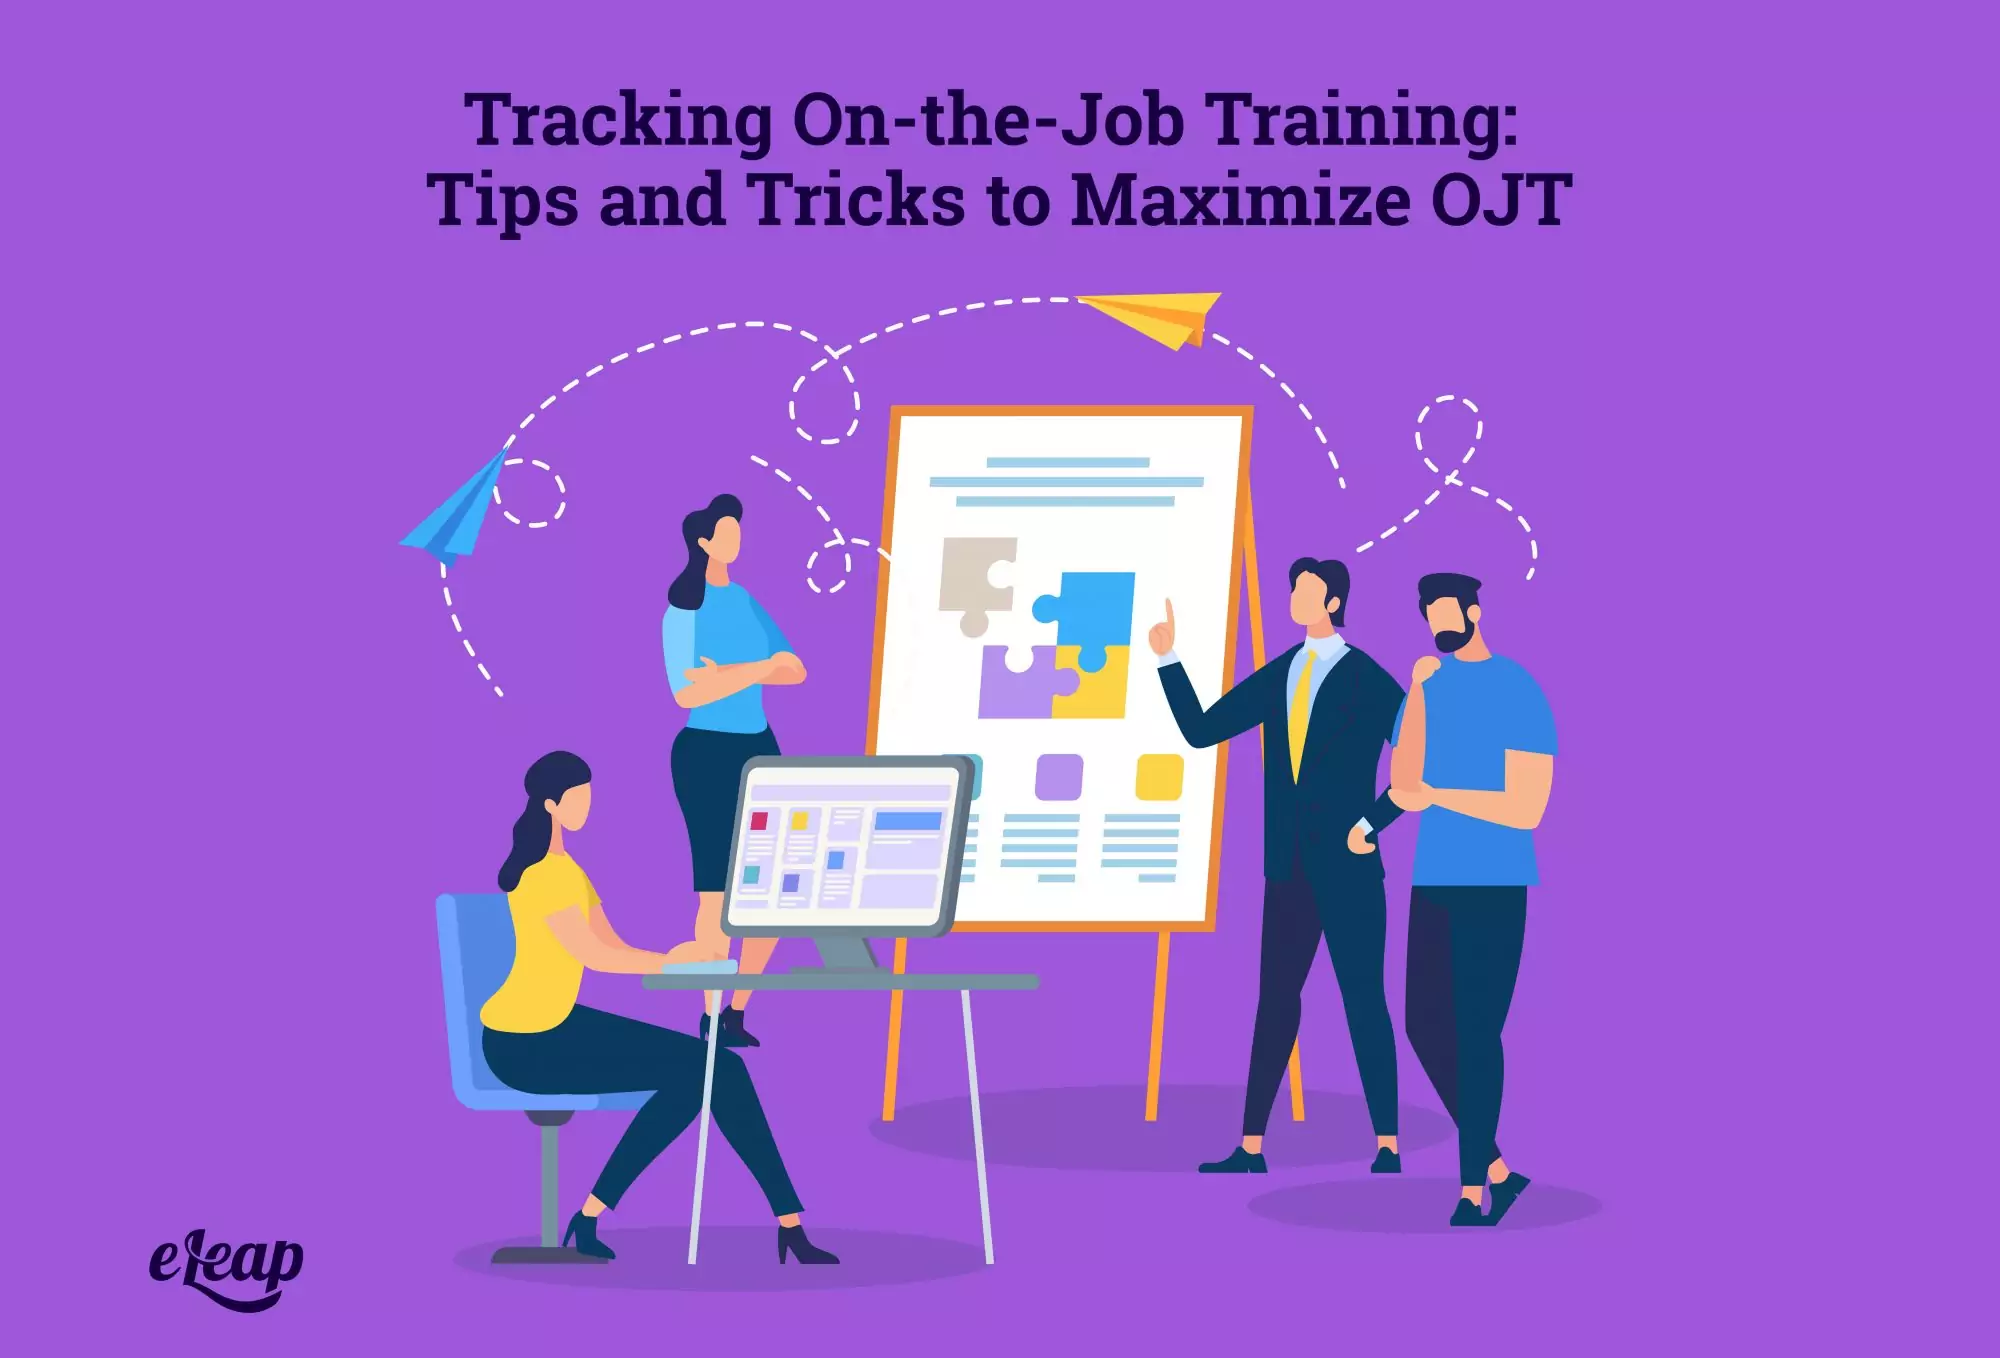 Tracking On-the-Job Training: Tips and Tricks to Maximize OJT